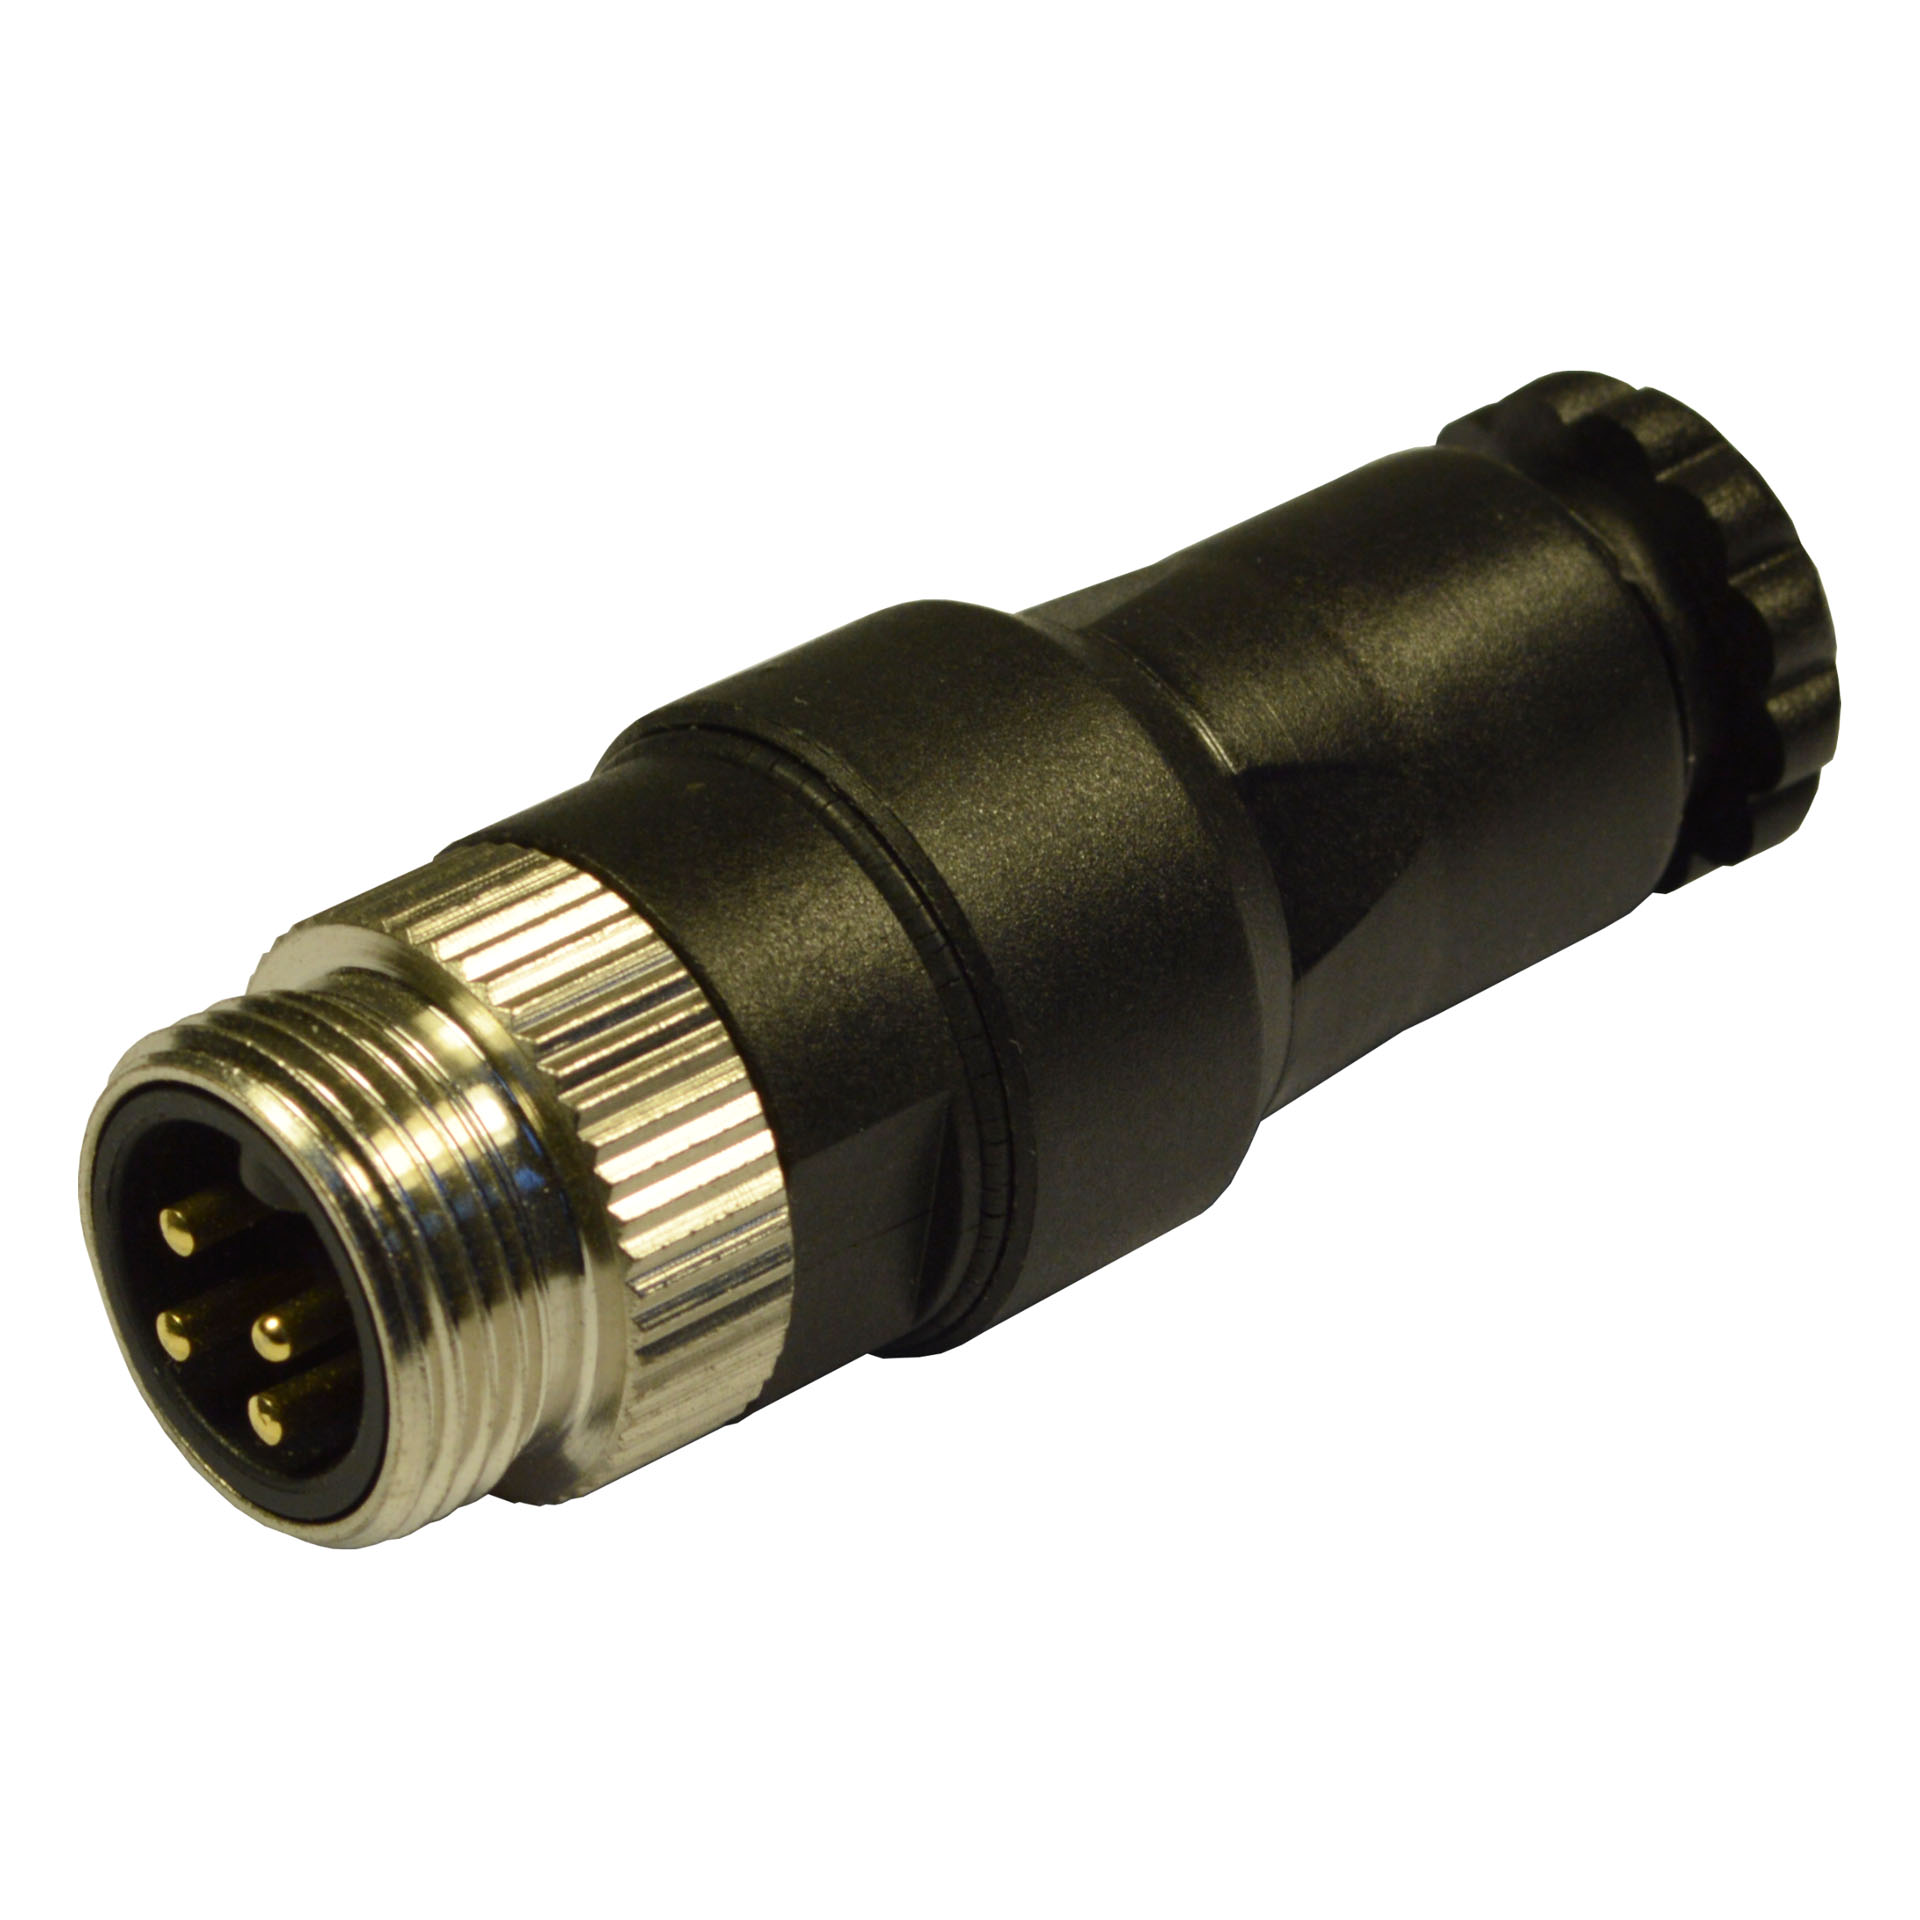 7/8" field attachable,male,180°,4p.,PG9/11unified